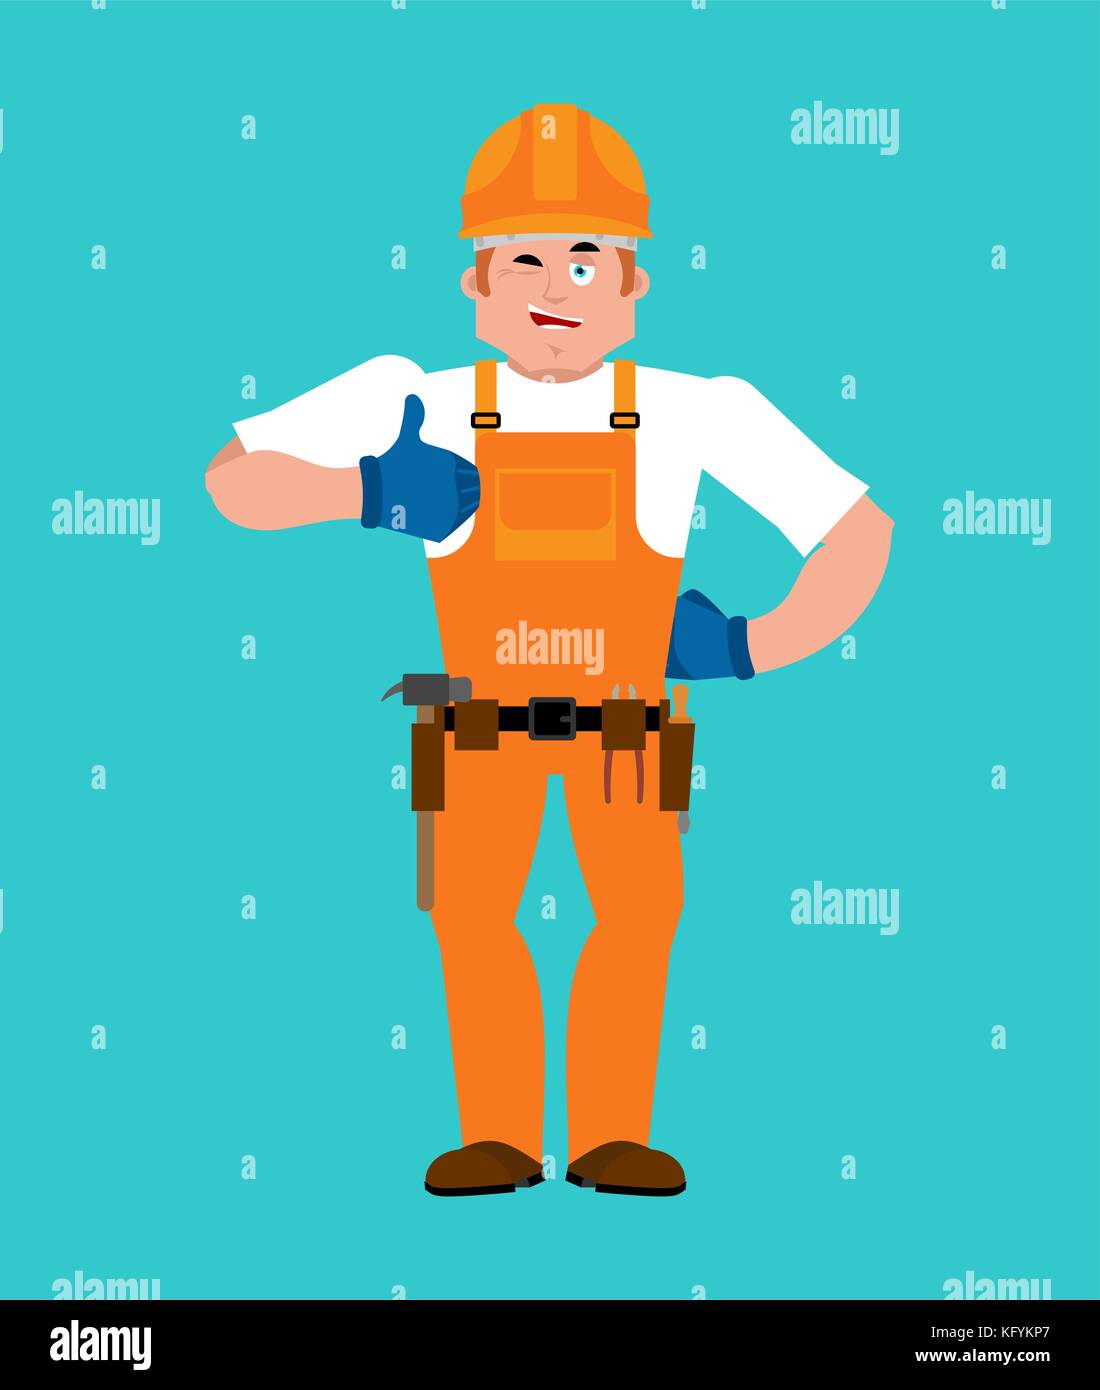 Workman Safety High Resolution Stock Photography And Images Page